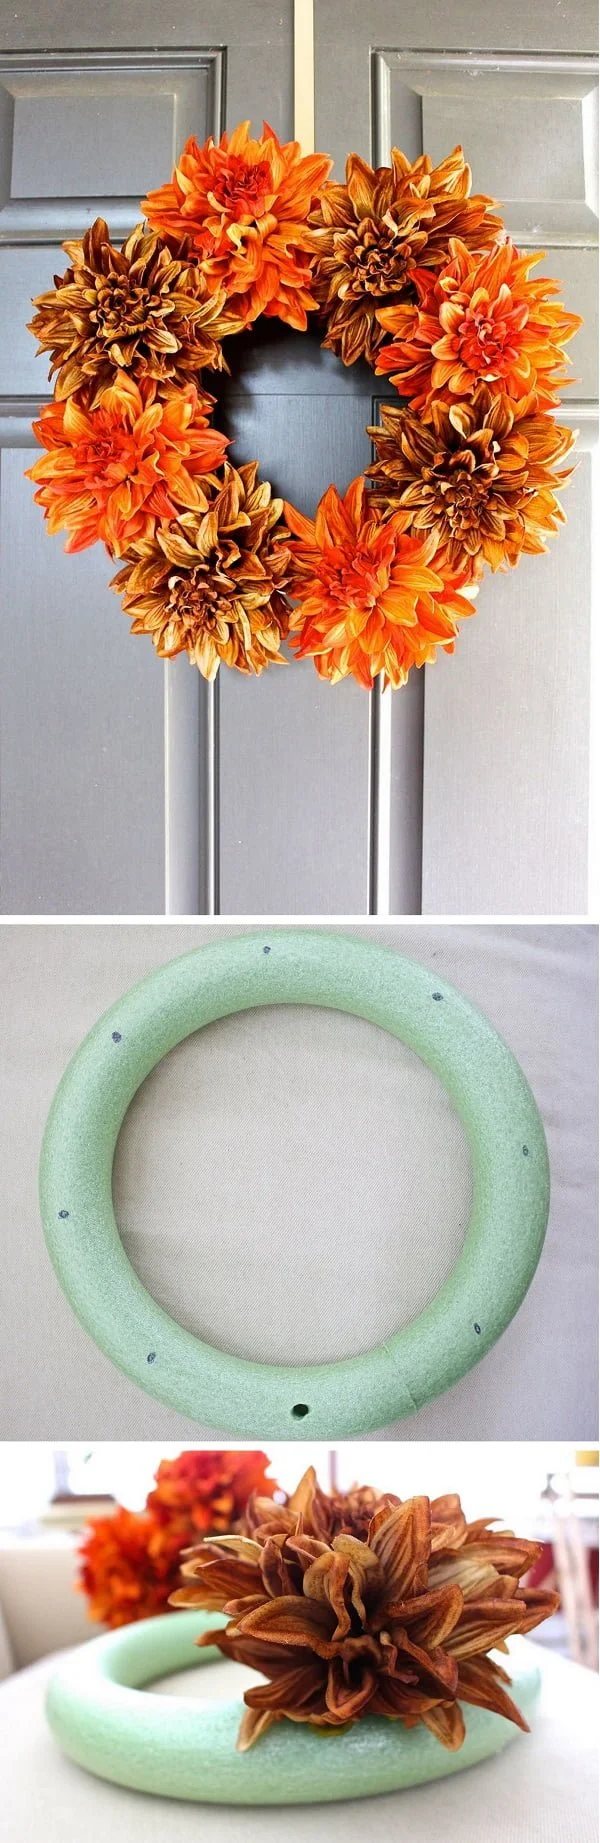 Check out the tutorial how to make a DIY fall wreath